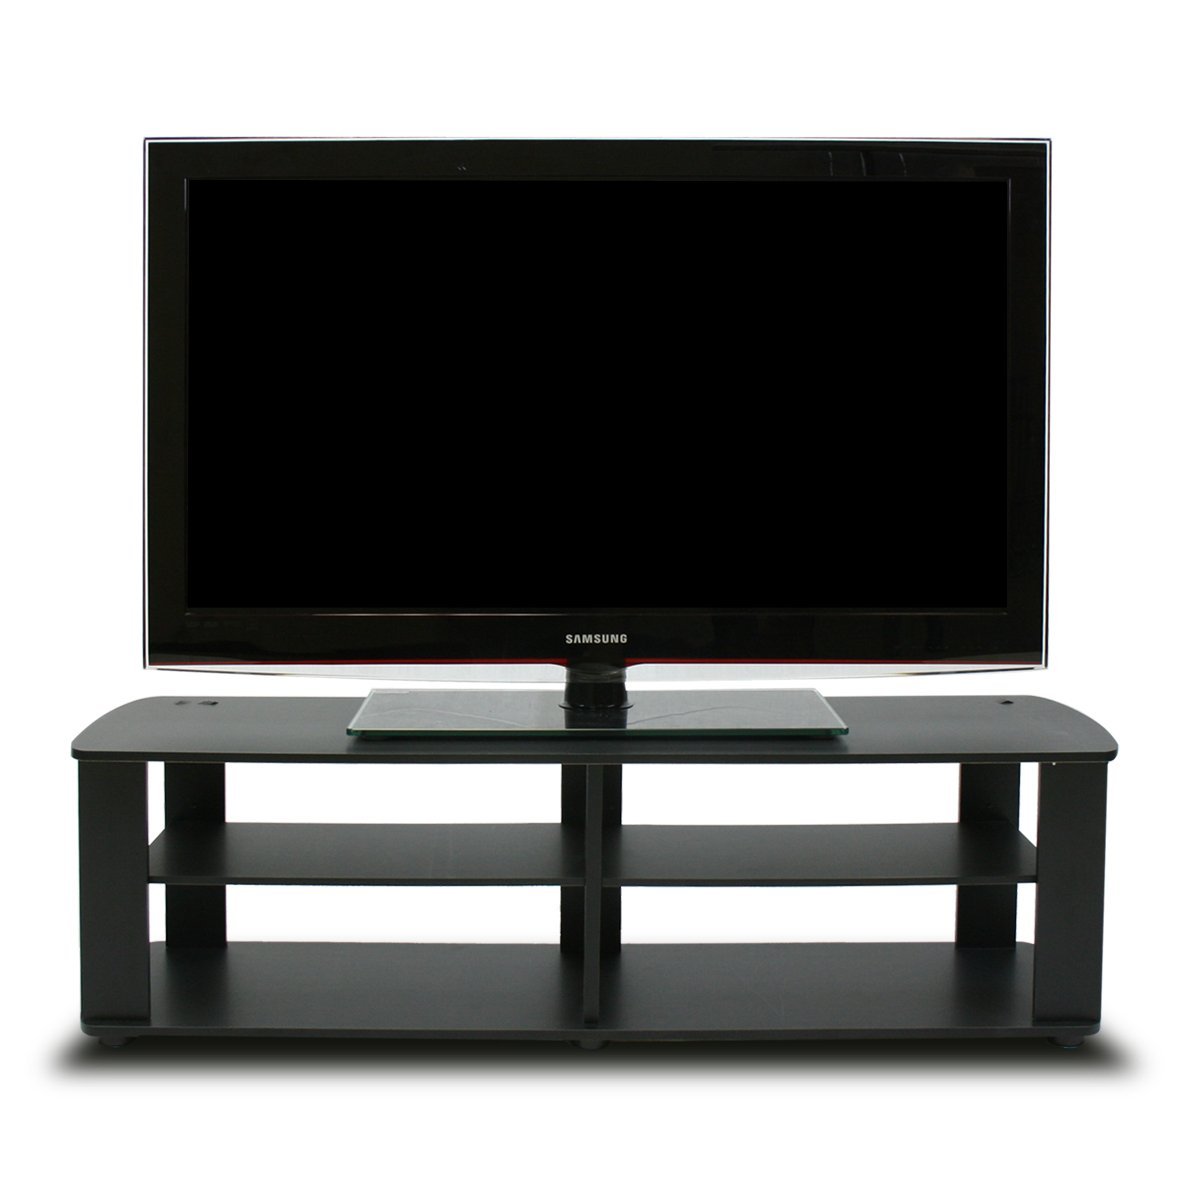 You are here: » Home » TV Stand » Modern Stylish Furinno TV Stands